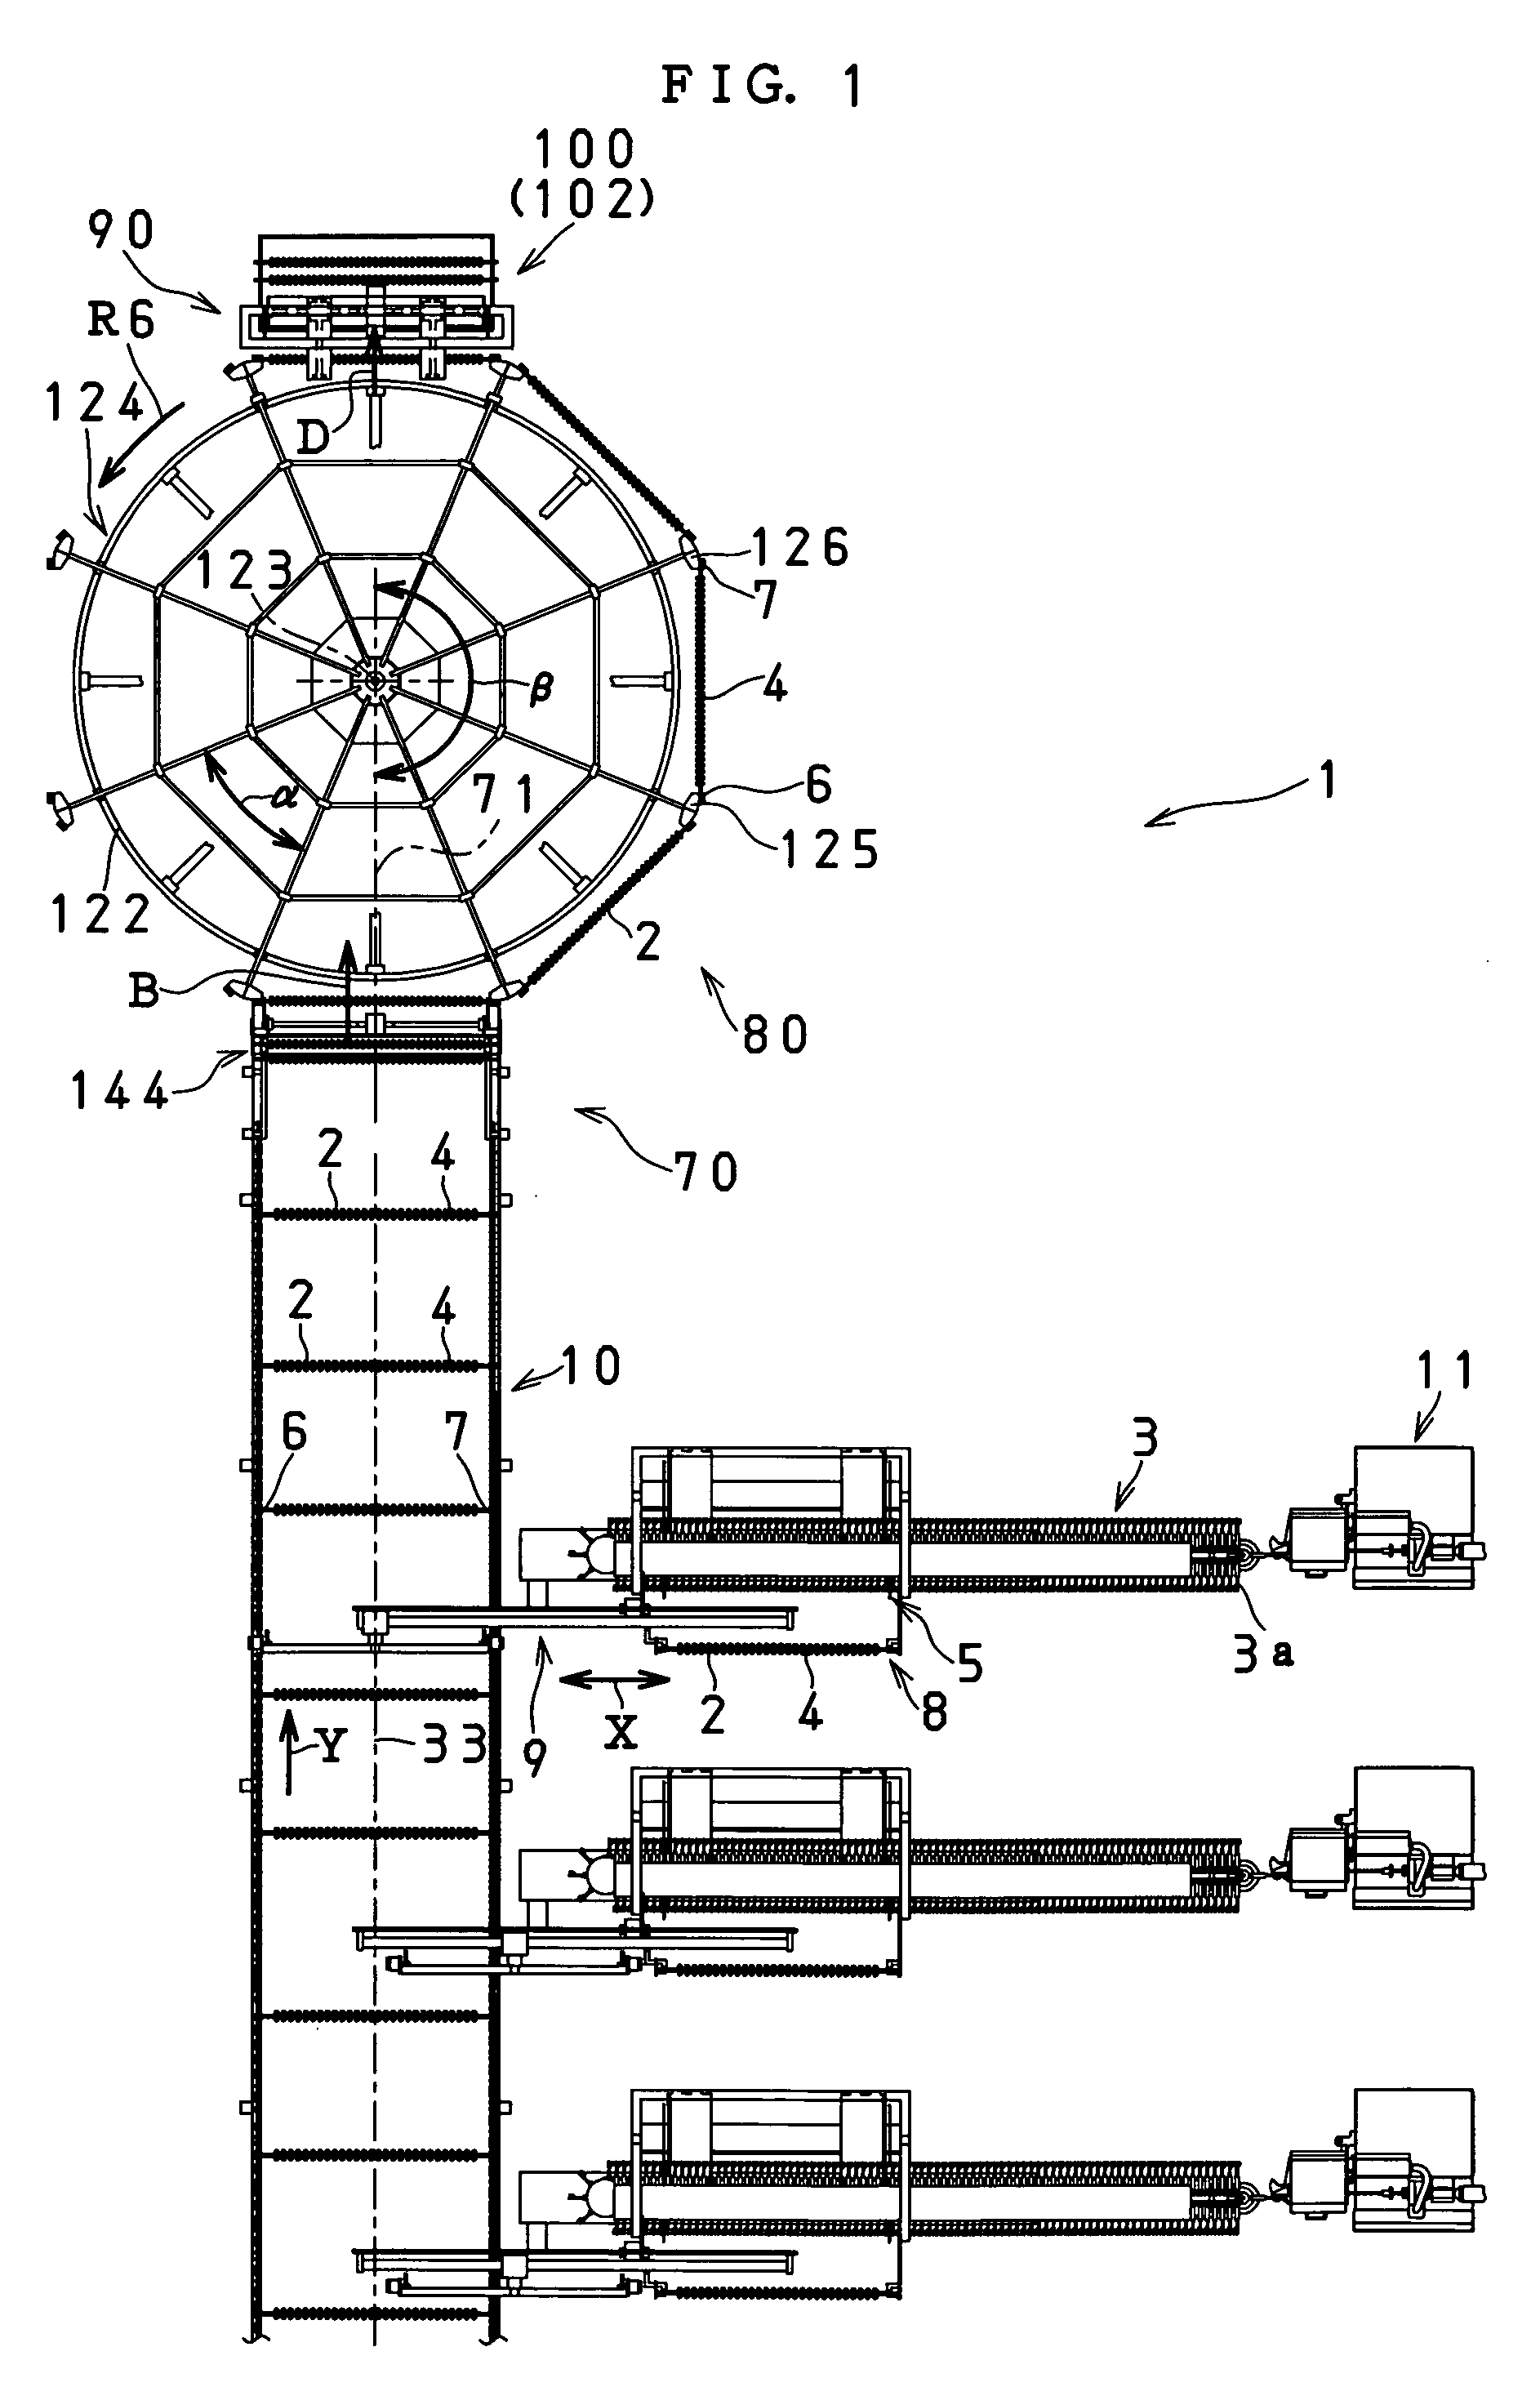 Method and apparatus for transferring a stick with a food product such as a sausage suspended therefrom